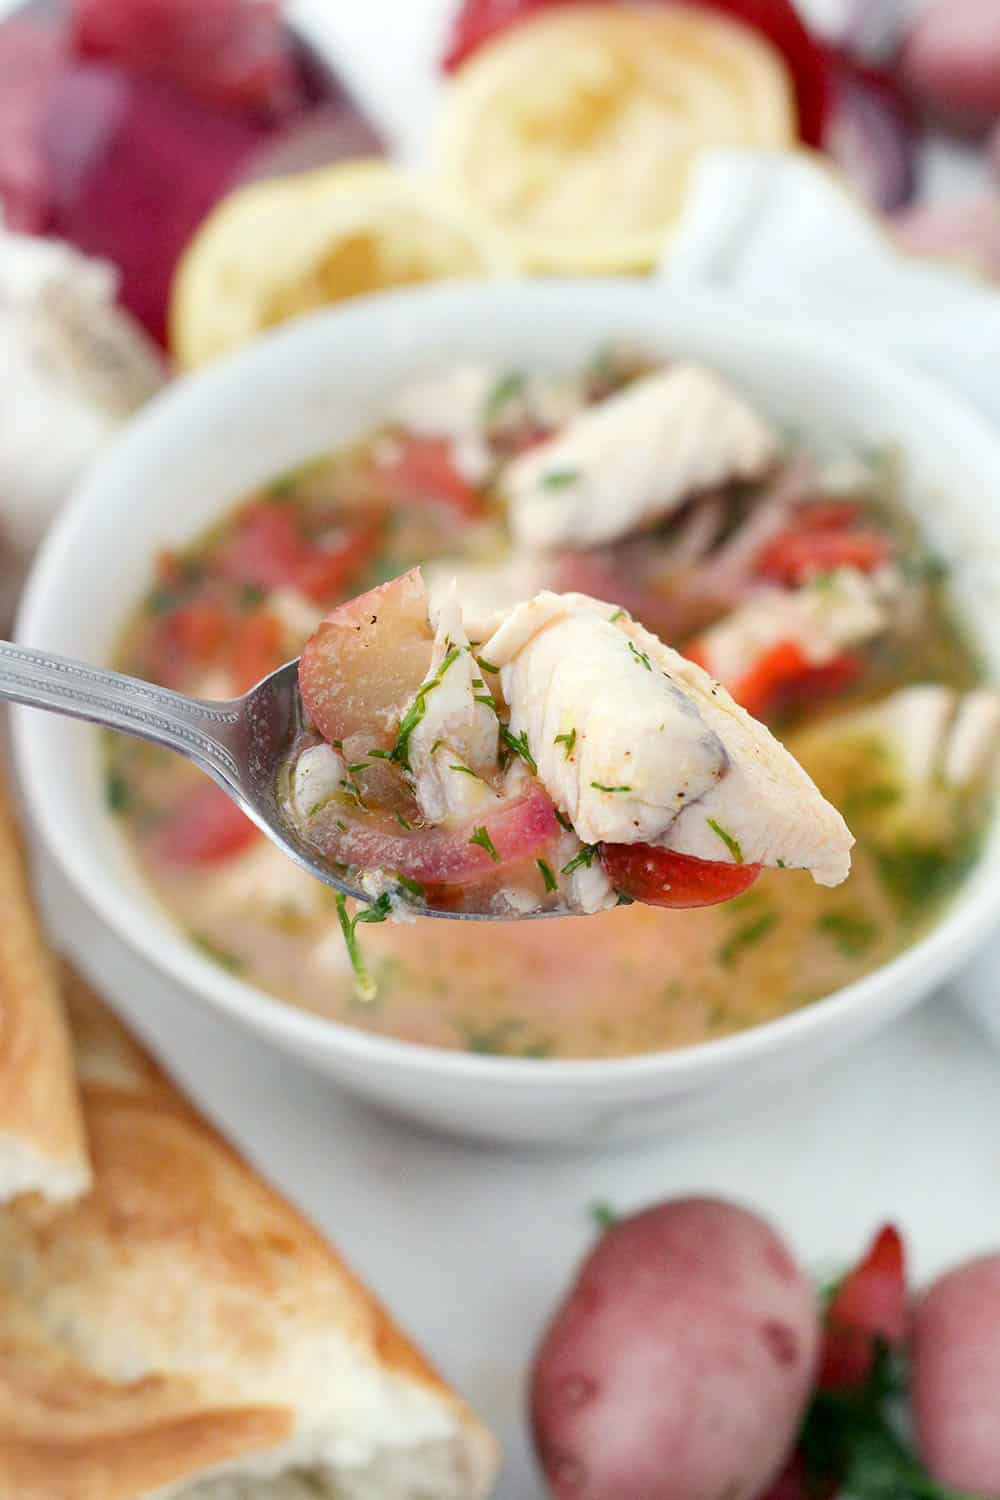 This Instant Pot Fish Stew is a delicious Mediterranean recipe year-round. It features sea bass, potatoes, and tomatoes, and it's flavored with fresh lemon juice, dill, and extra-virgin olive oil. It only takes 20 minutes to make in a pressure cooker!